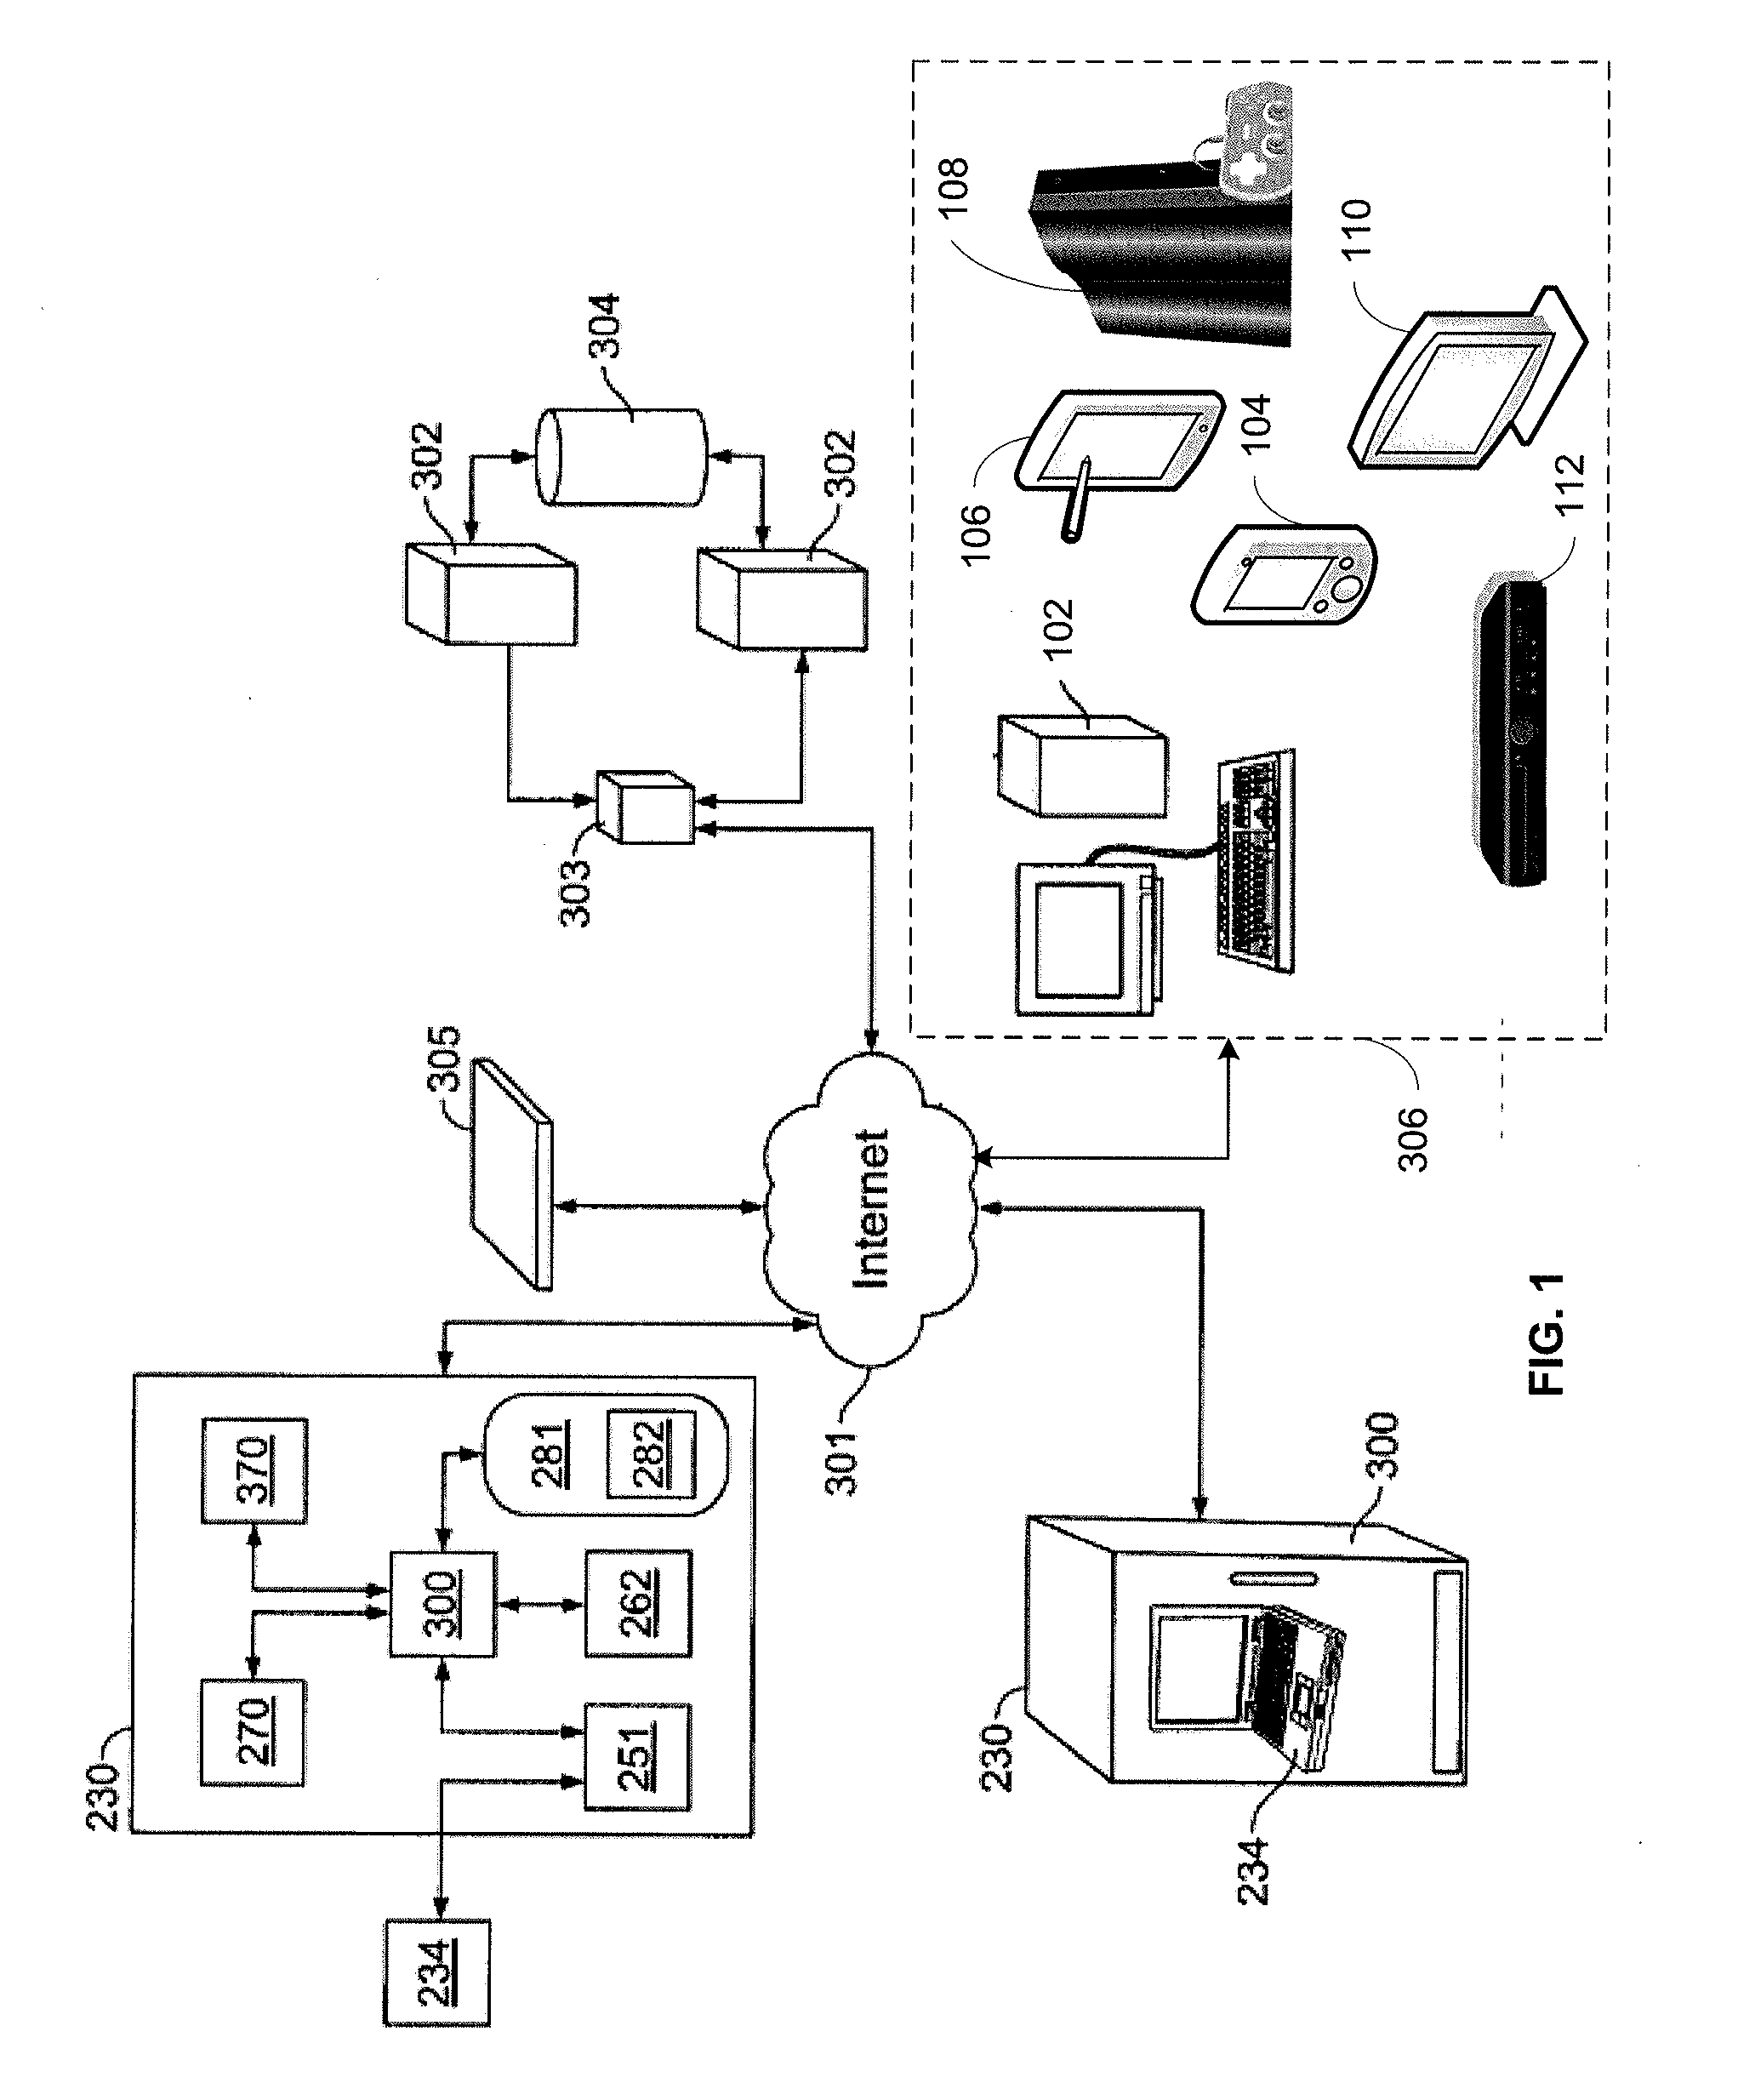 System and method for providing the identification of geographically closest article dispensing machines